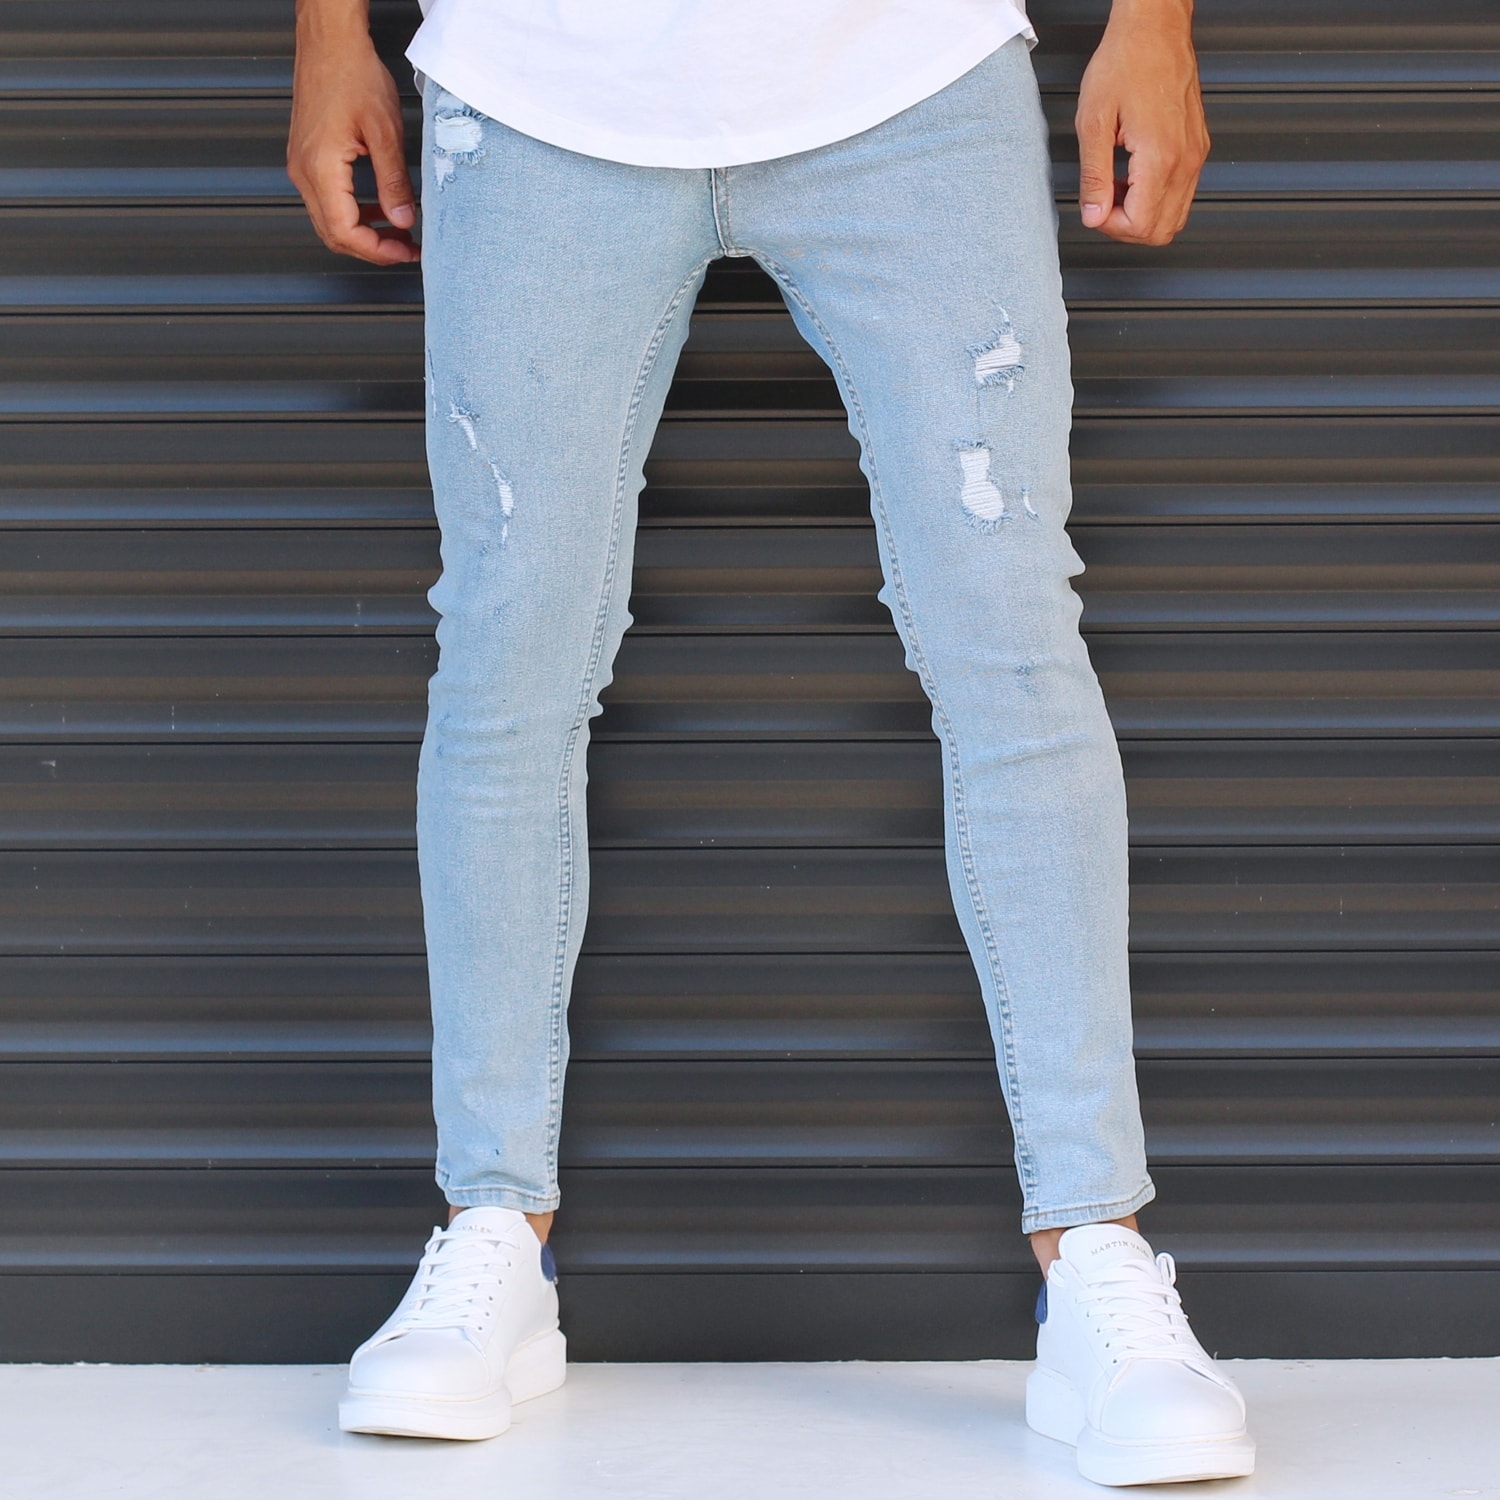 narrow jeans style